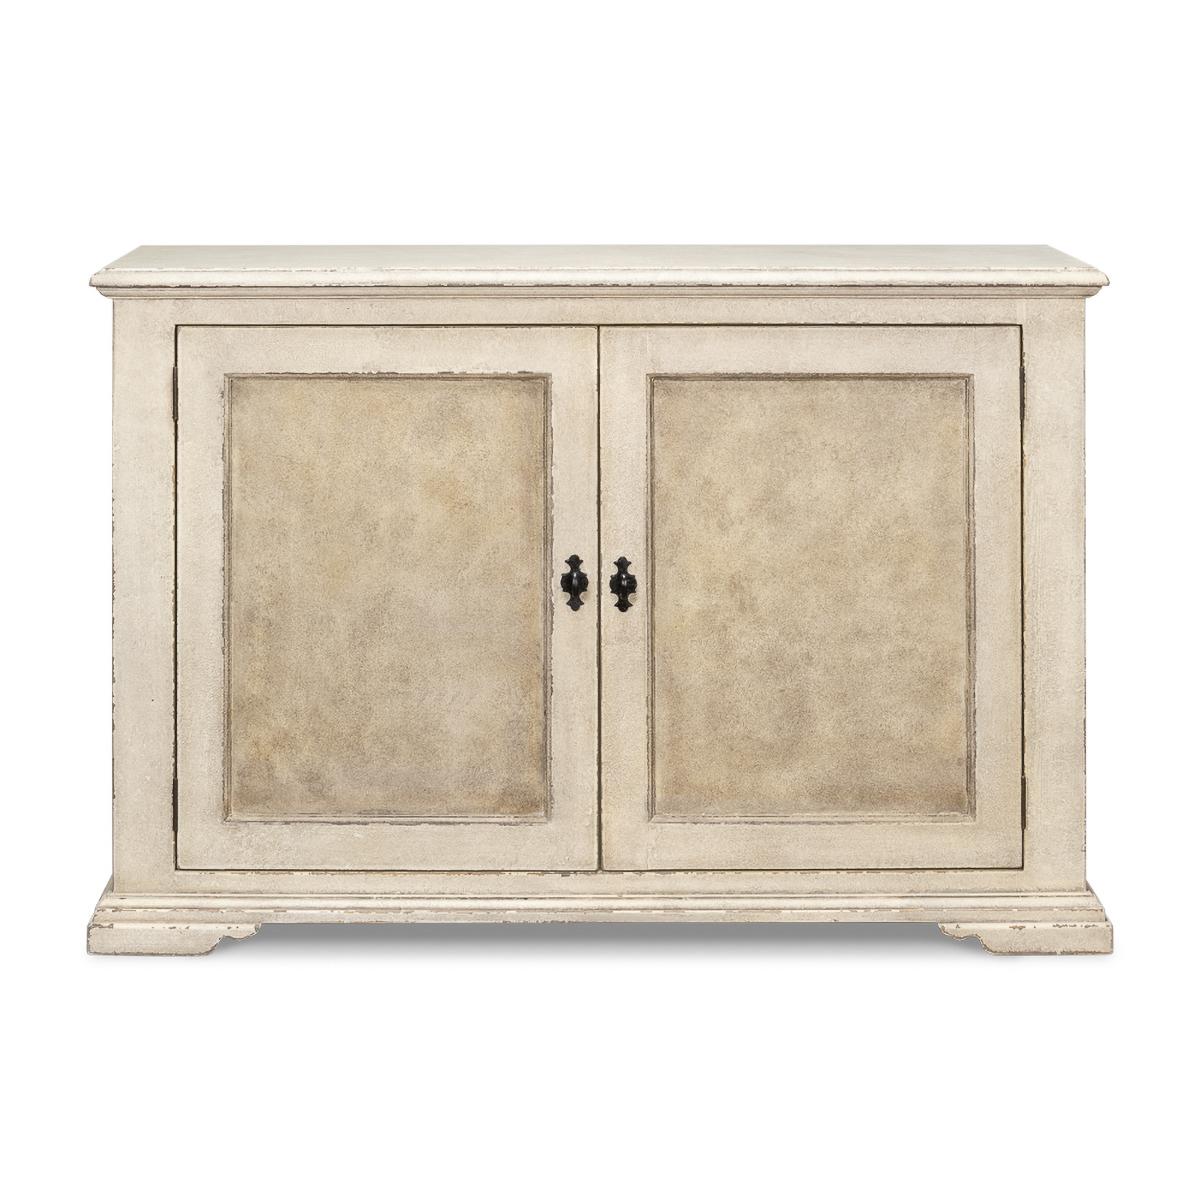 A French Provincial painted credenza with two tones of textured and antiqued rustic paint, the two-door cabinet interior fitted with shelves and a single drawer. Raised on bracket feet.

Dimensions: 60